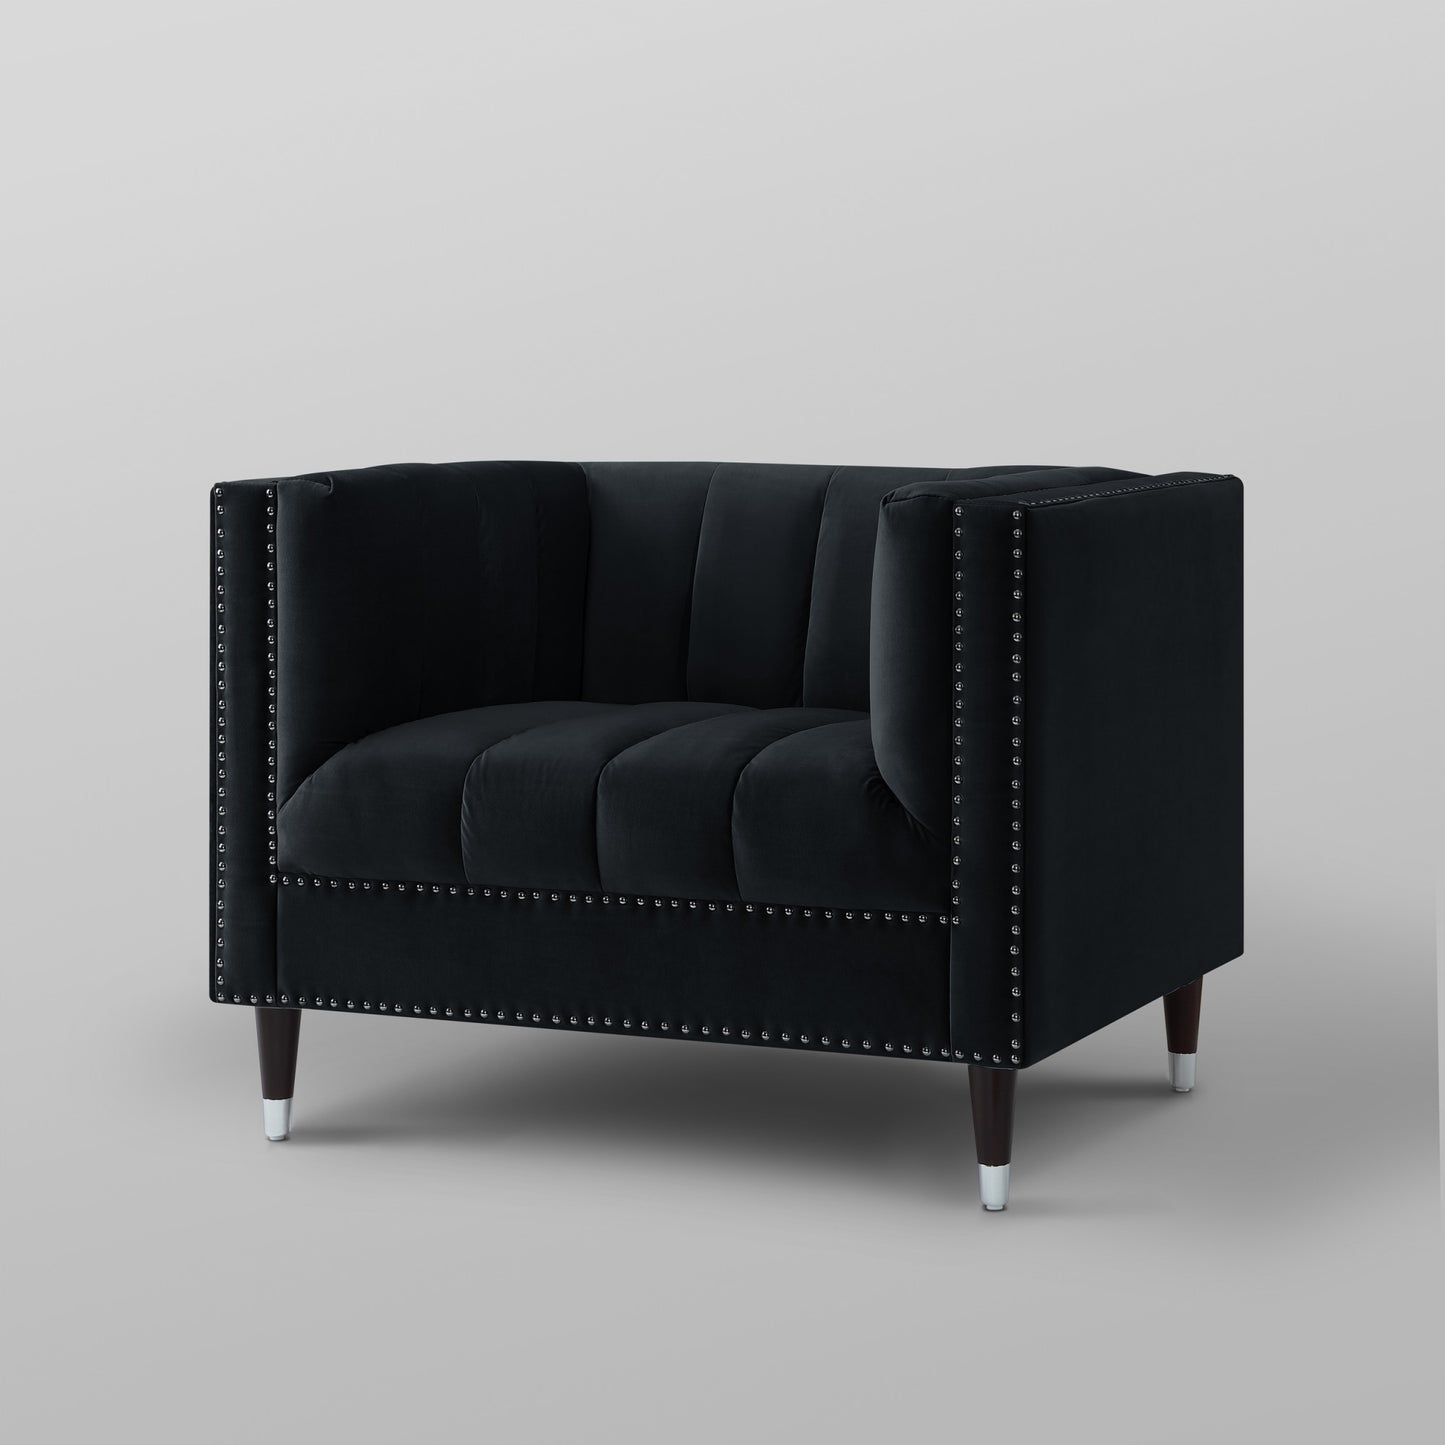 34" Black And Silver Velvet Tufted Club Chair